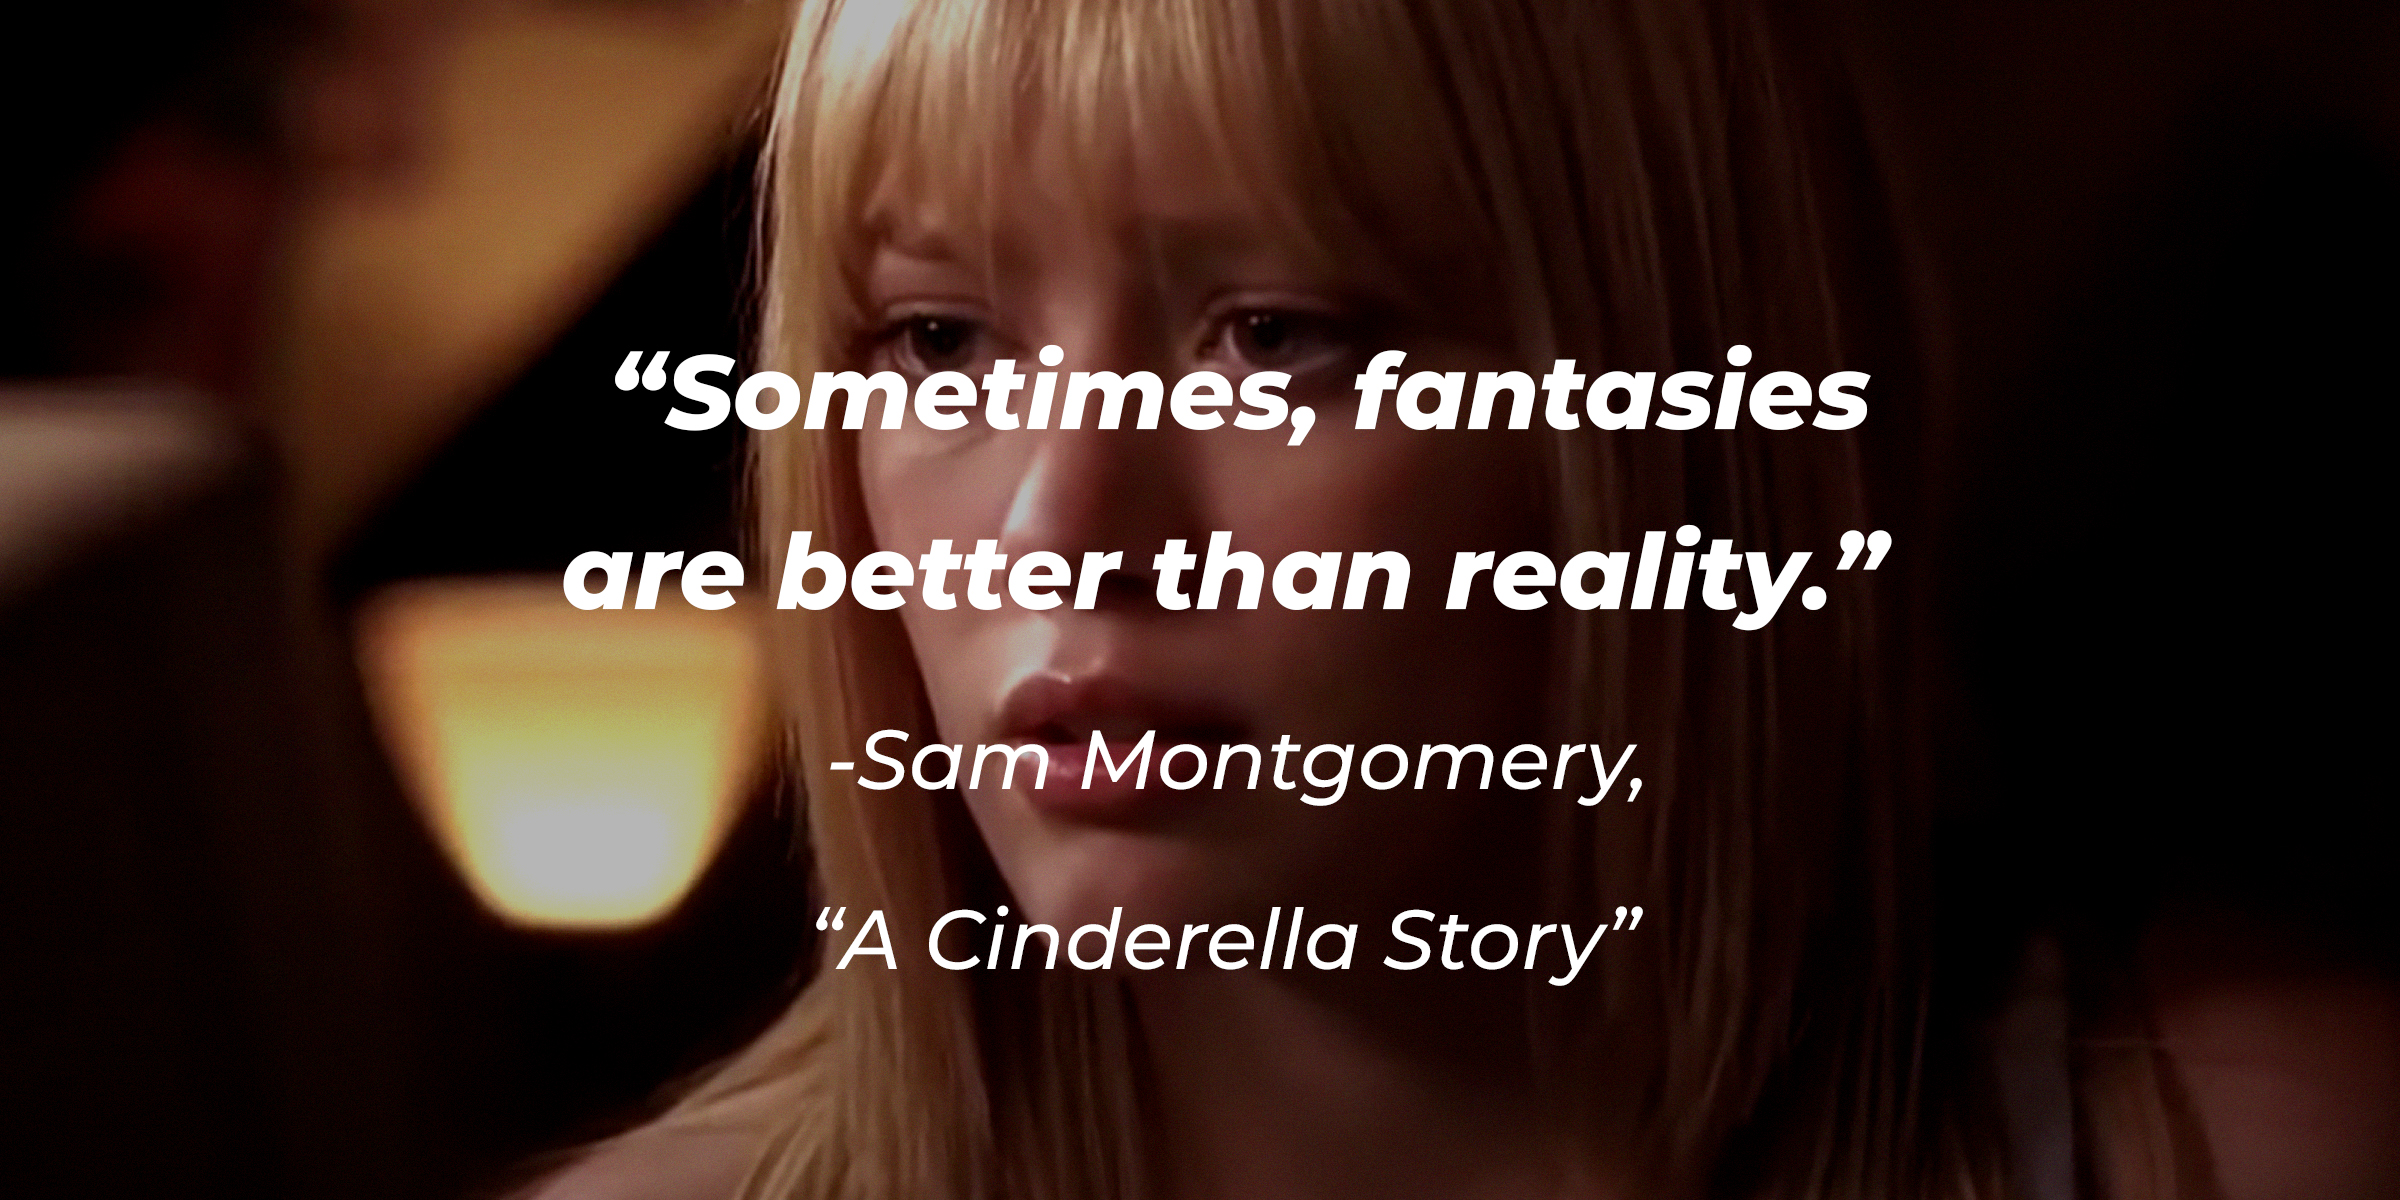 Sam Montgomery with her quote from "A Cinderella Story:" "Sometimes, fantasies are better than reality." | Source: Youtube.com/warnerbrosentertainment